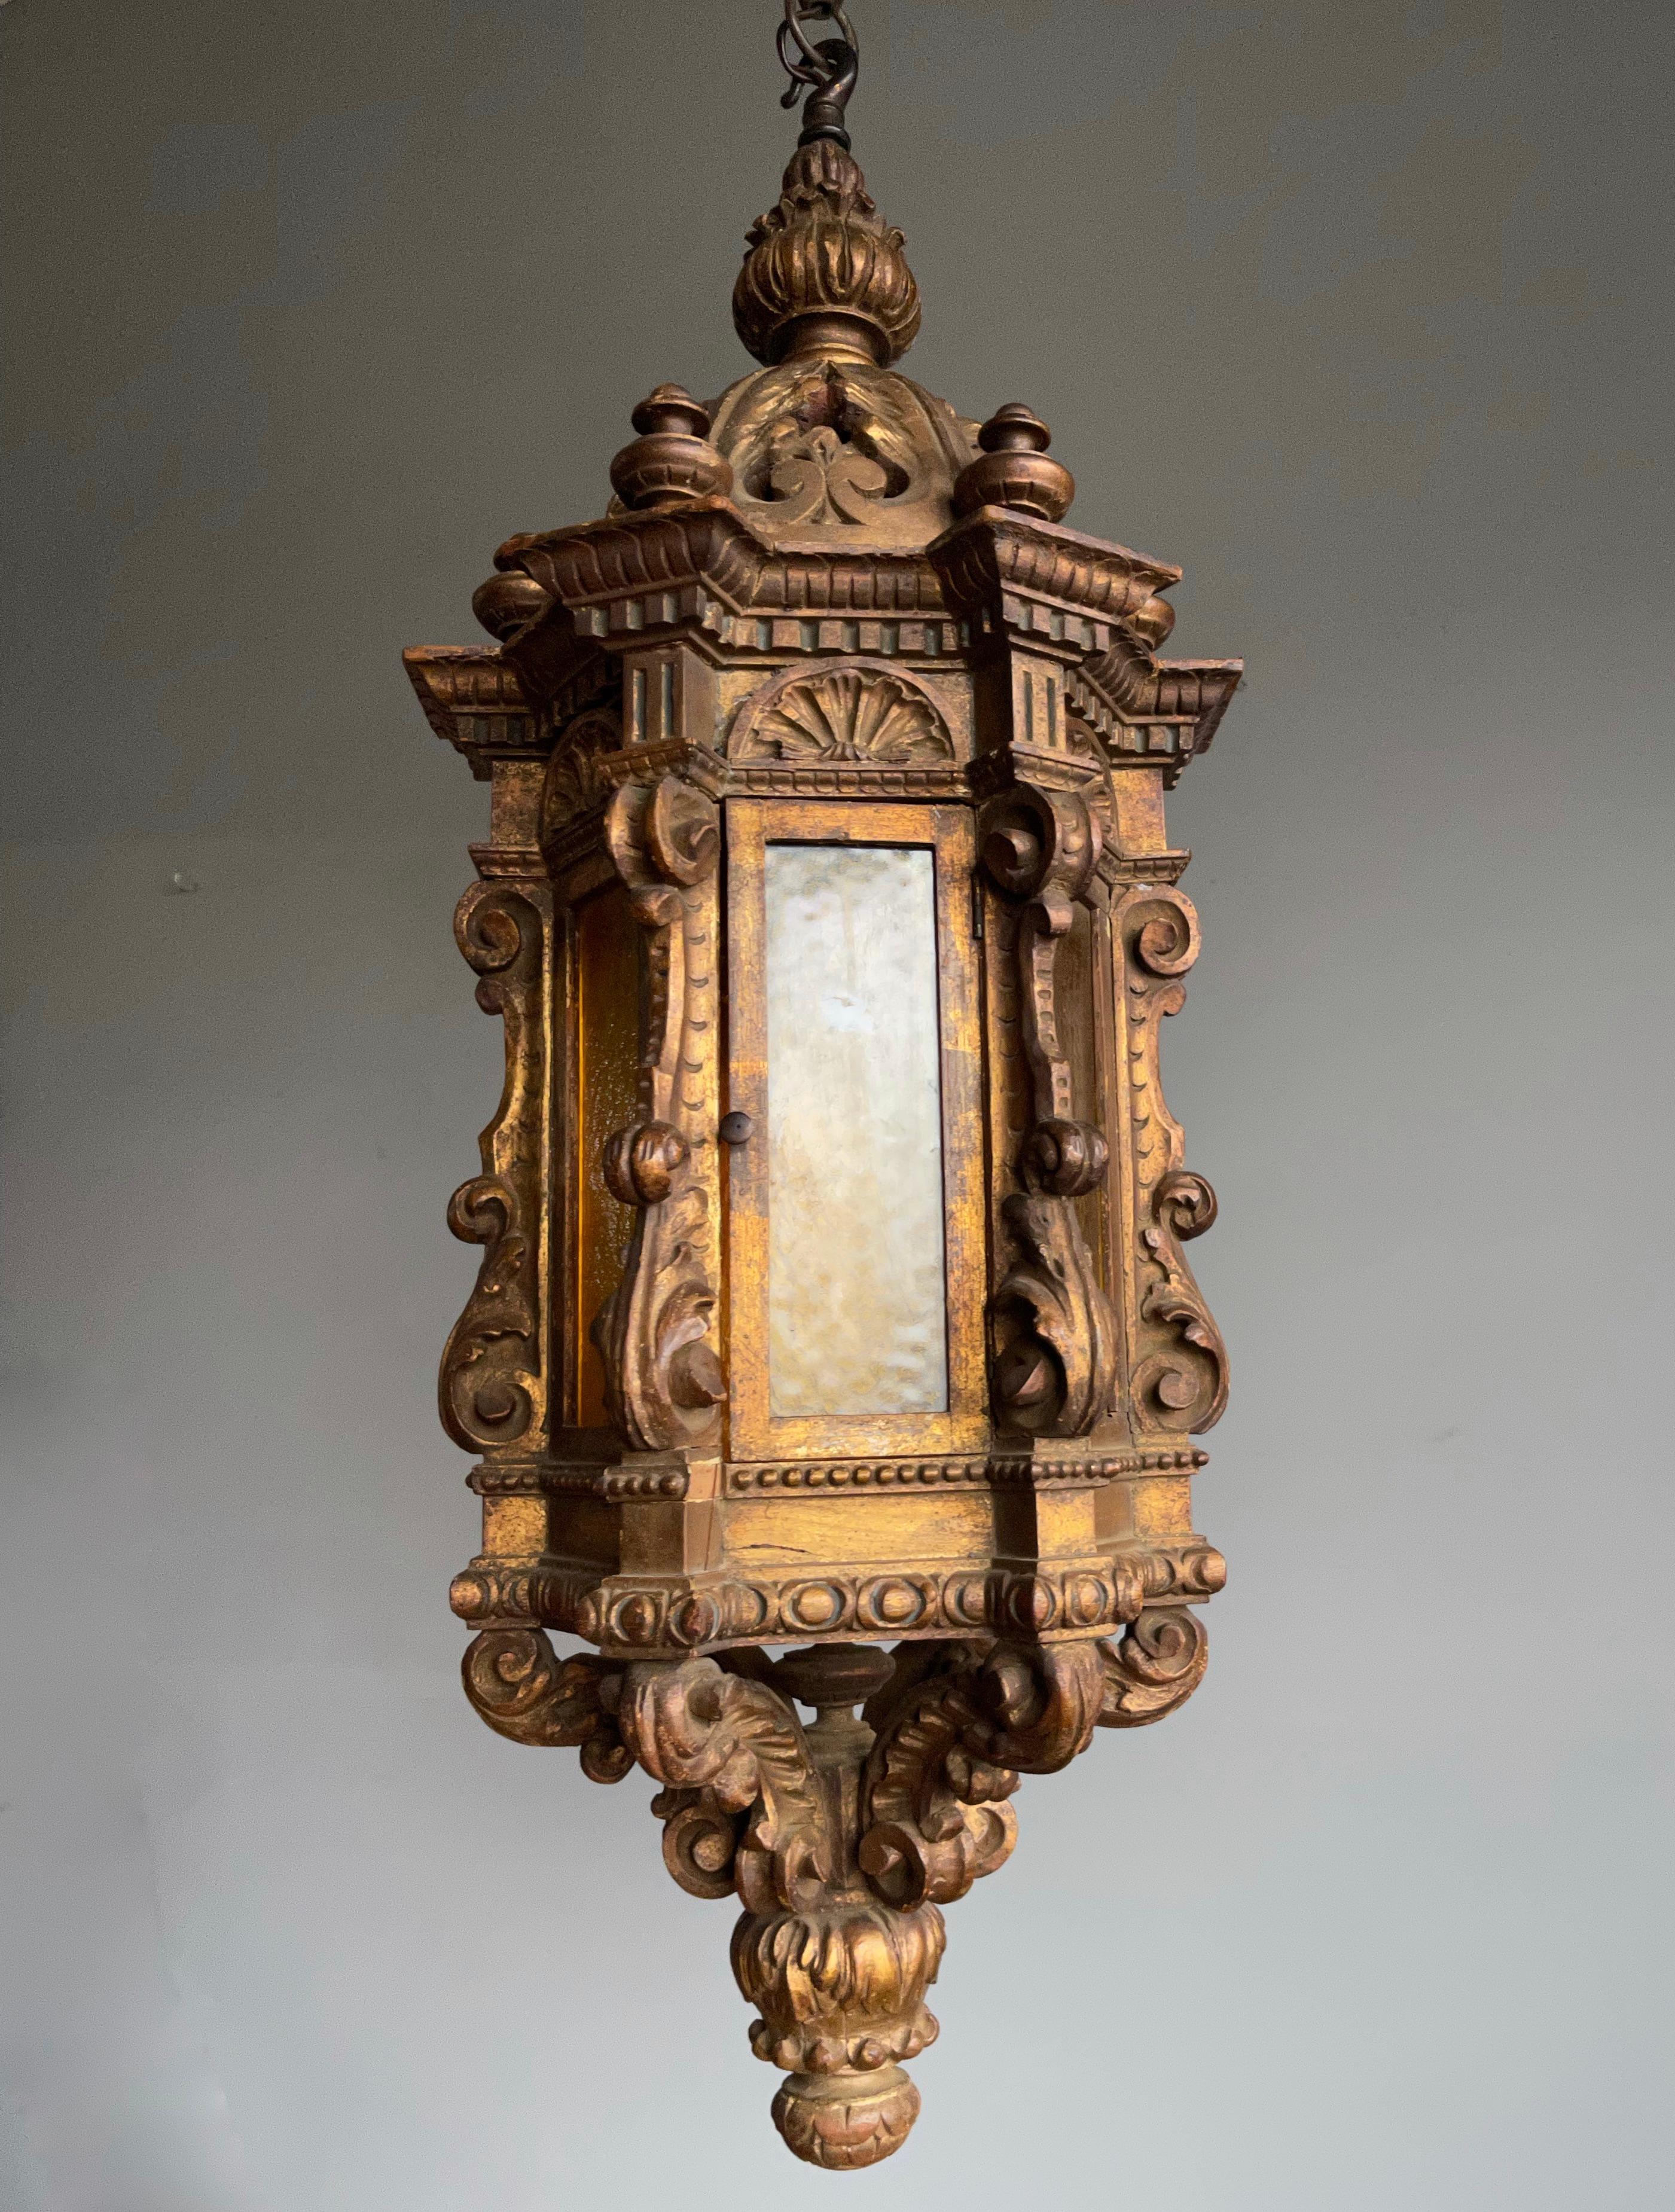 Truly impressive and all hand carved, hexagonal Renaissance Revival light fixture. 

If you are a collector of truly amazing antiques then this extra large and one of a kind pendant could be flying your way soon. With antique light fixtures as one